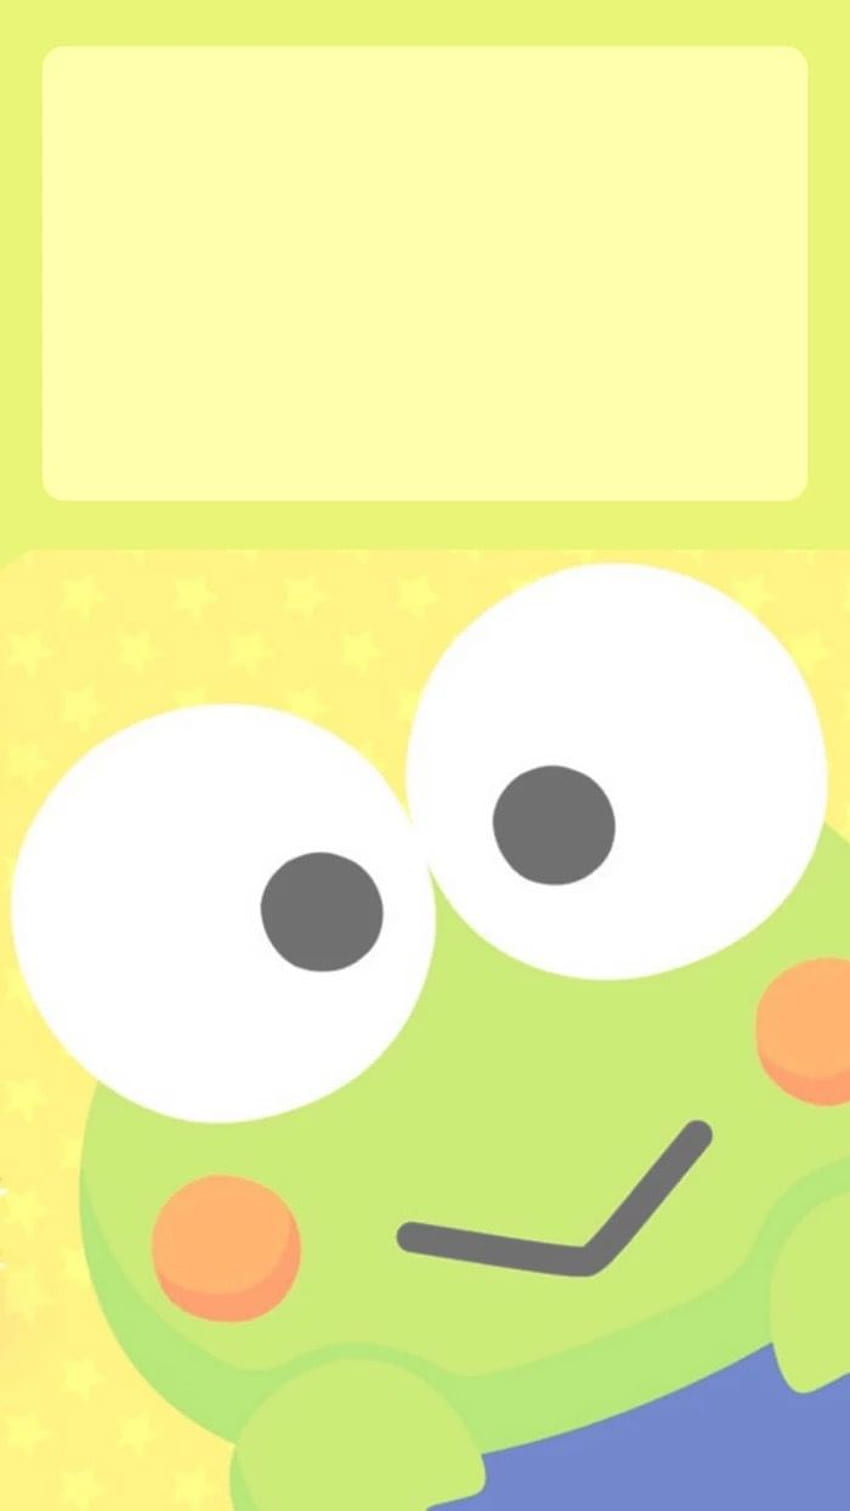 IPhone wallpaper of a green frog with a yellow background - Keroppi